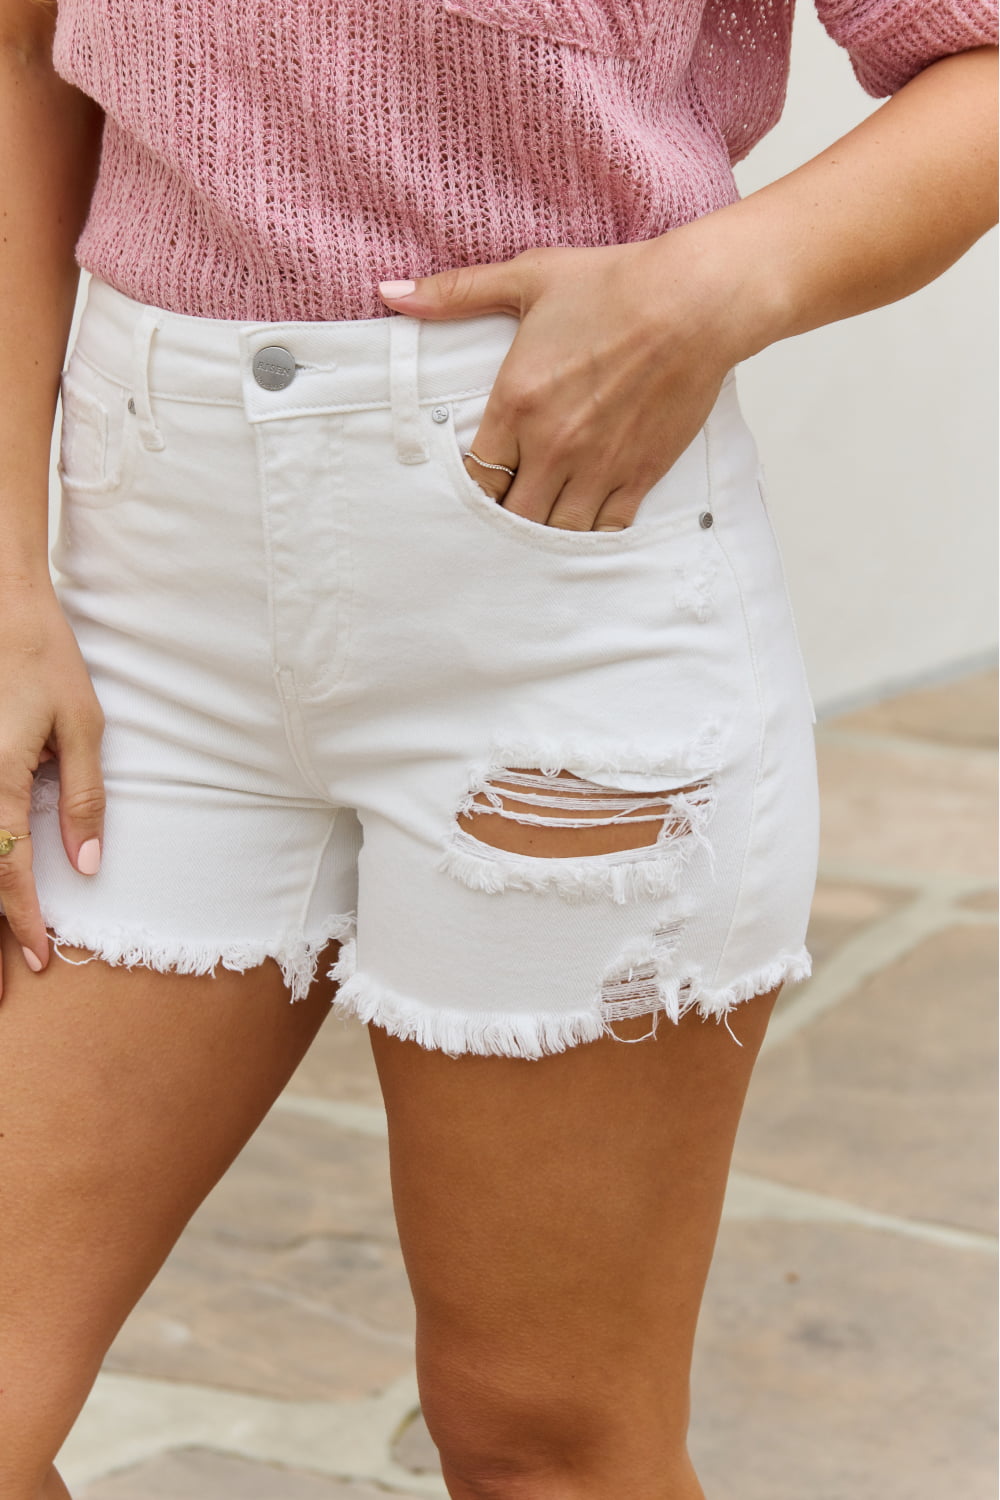 RISEN Lily High Waisted Distressed Shorts - The Beauty Alley Boutique Inc